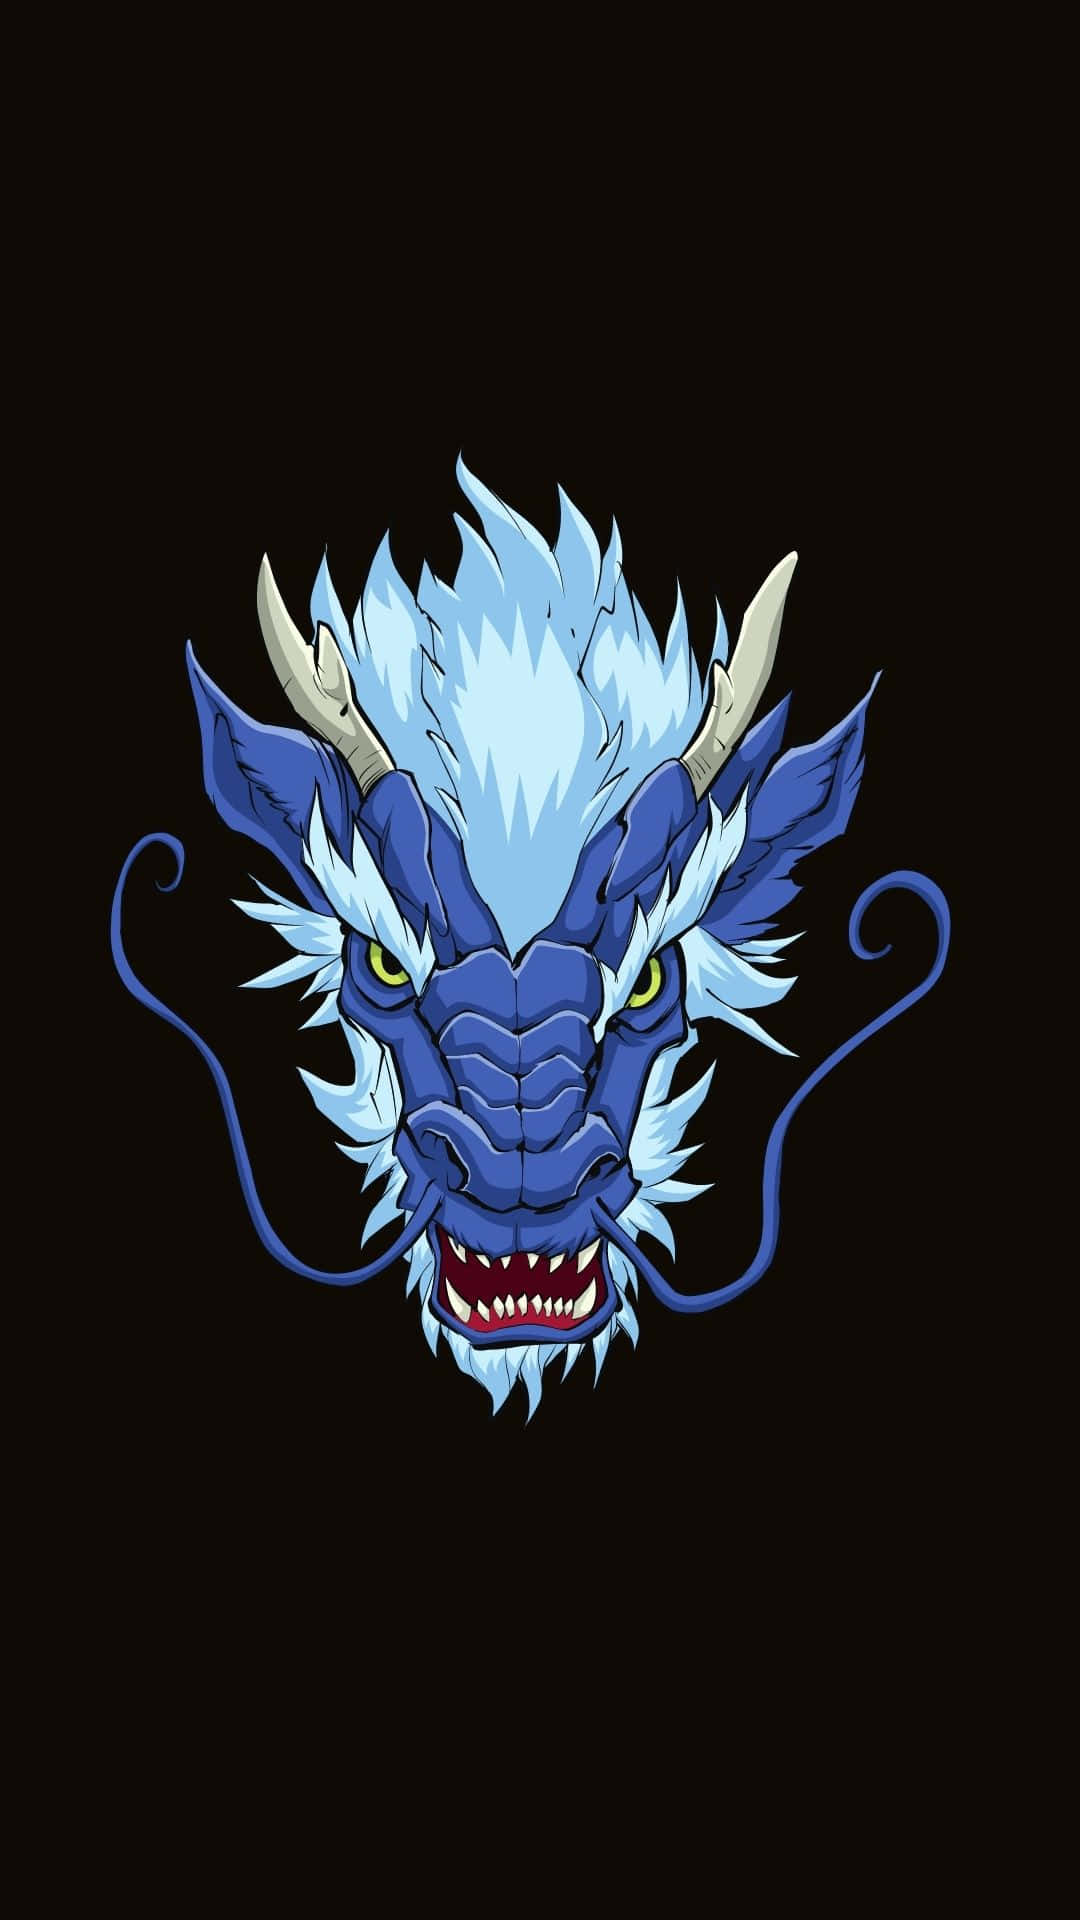 Stunning and Majestic Blue Dragon Wallpaper